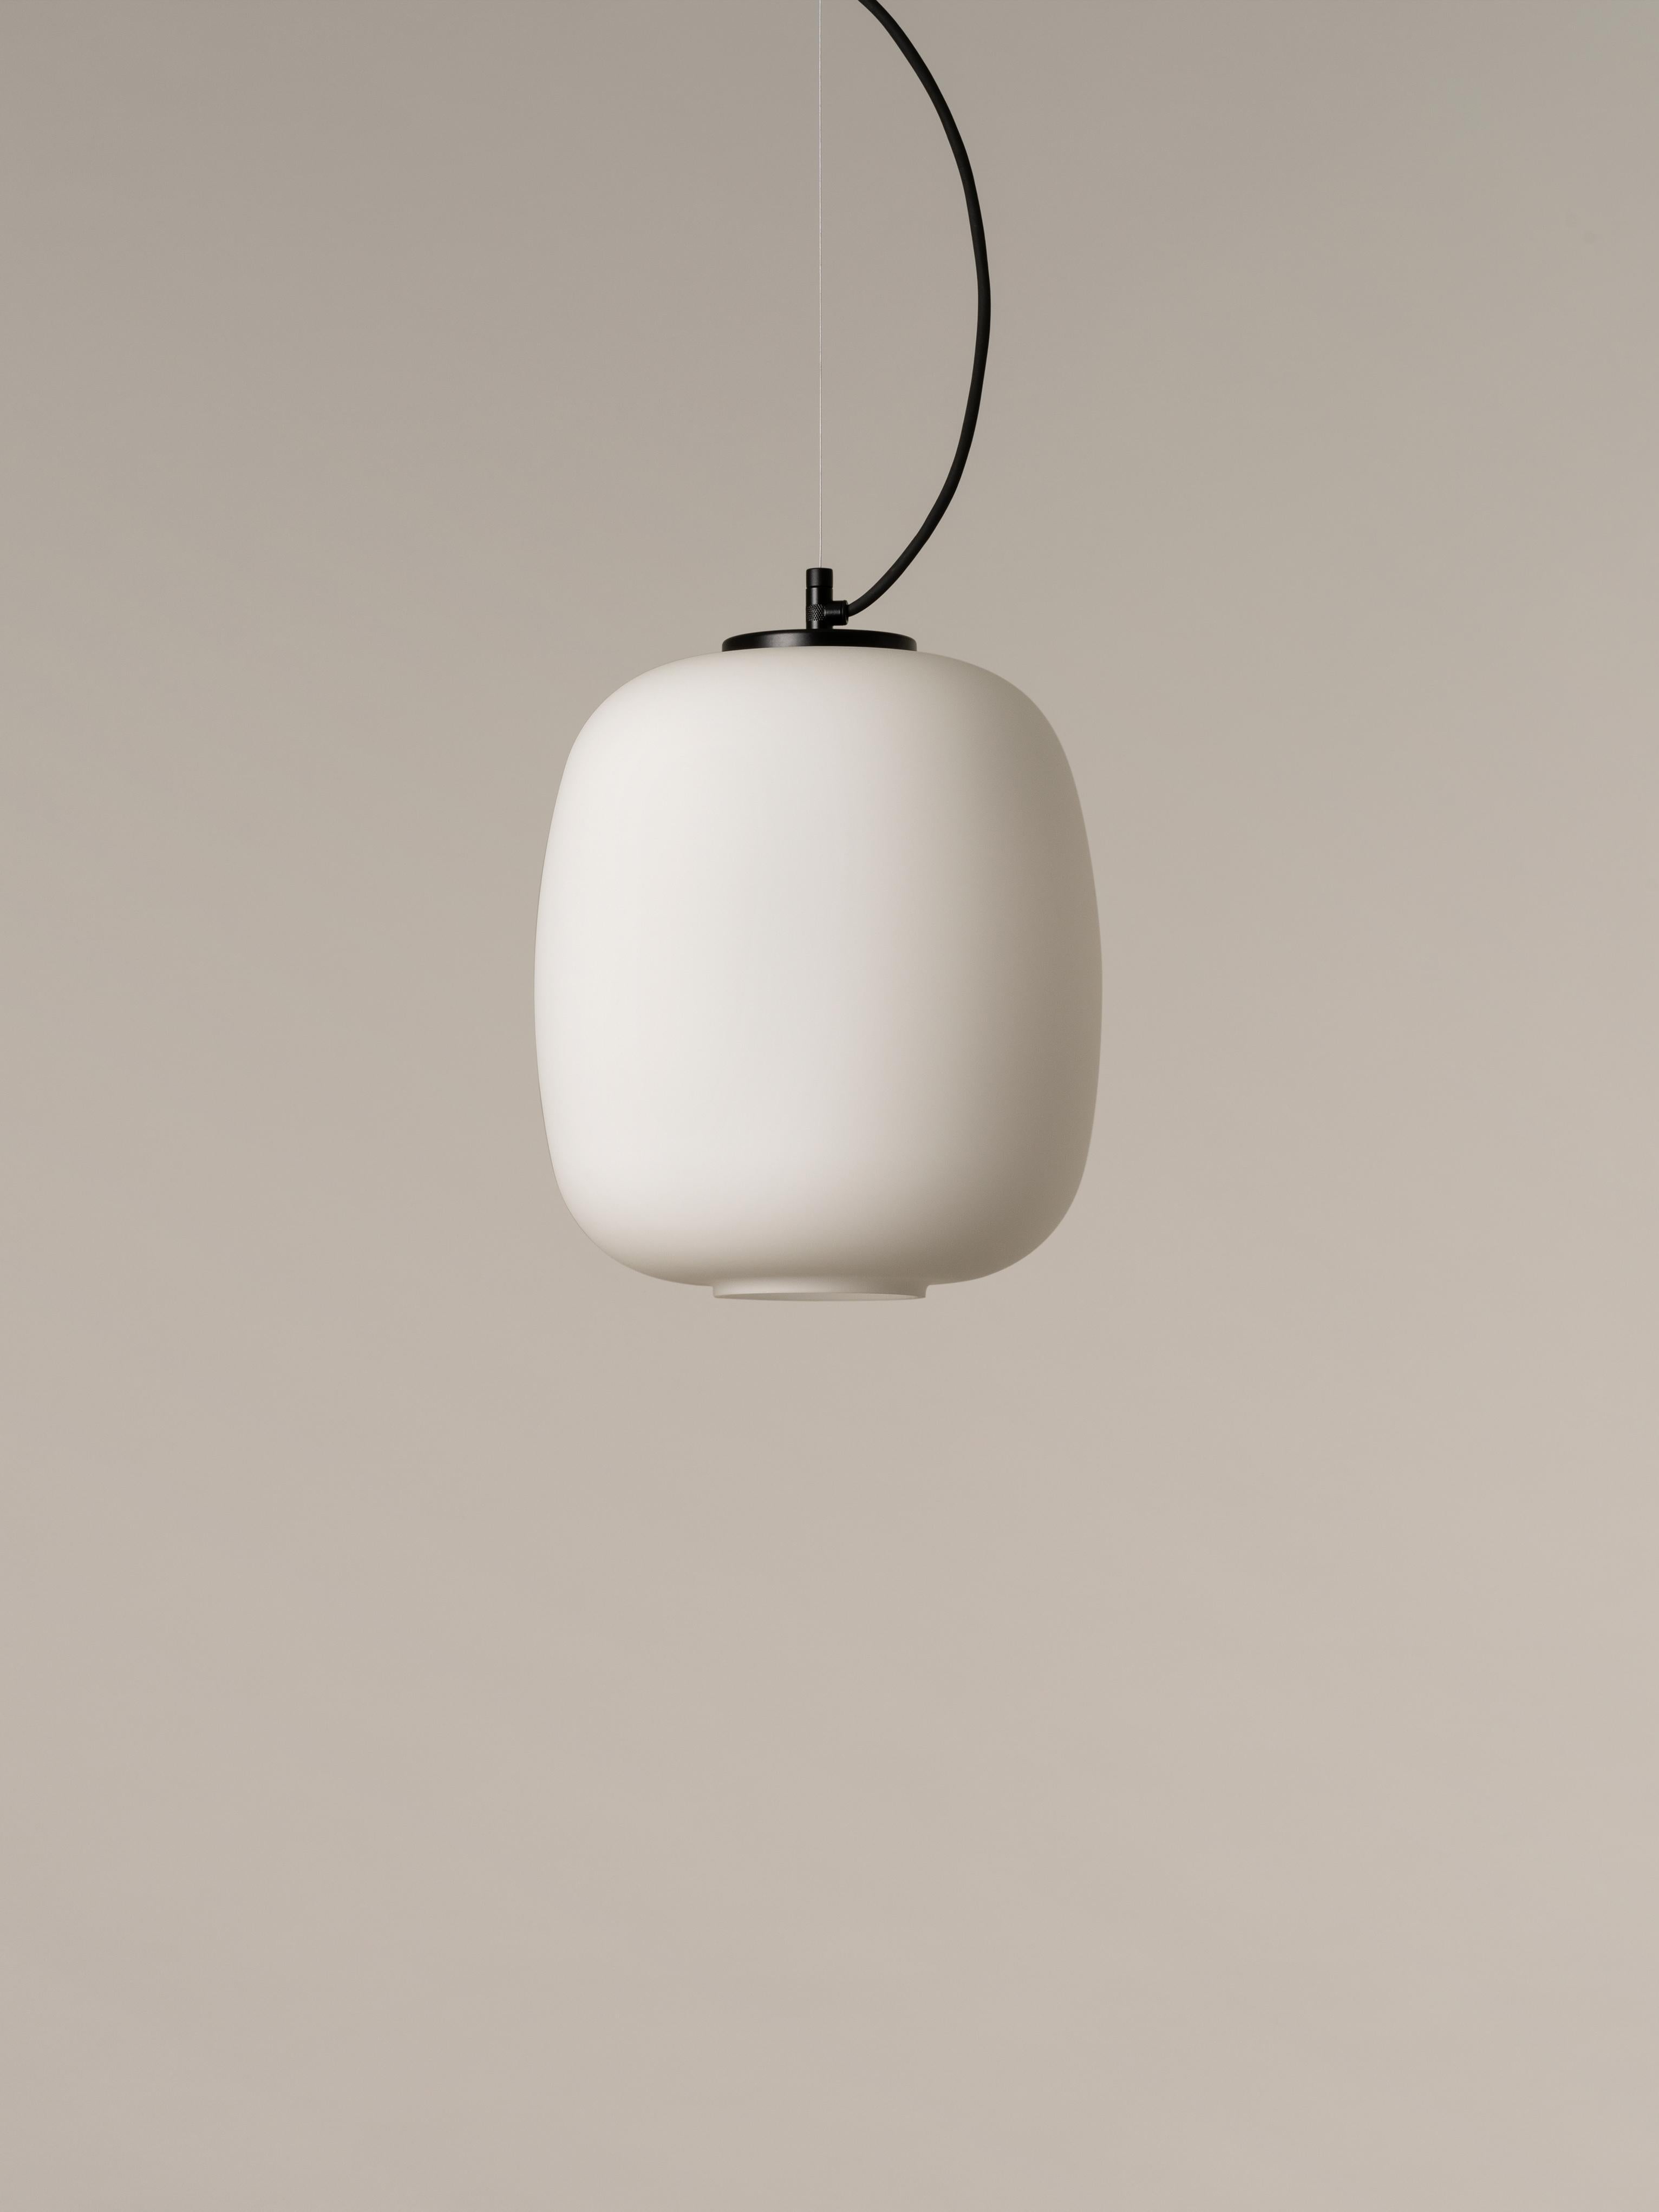 Globo Cesta pendant lamp by Miguel Milá
Dimensions: D 27 x H 31 cm
Materials: Metal, glass.

Freed from its well-known wooden structure, the opal glass now shines on its own, attaining the elegance of a classic with an entirely contemporary